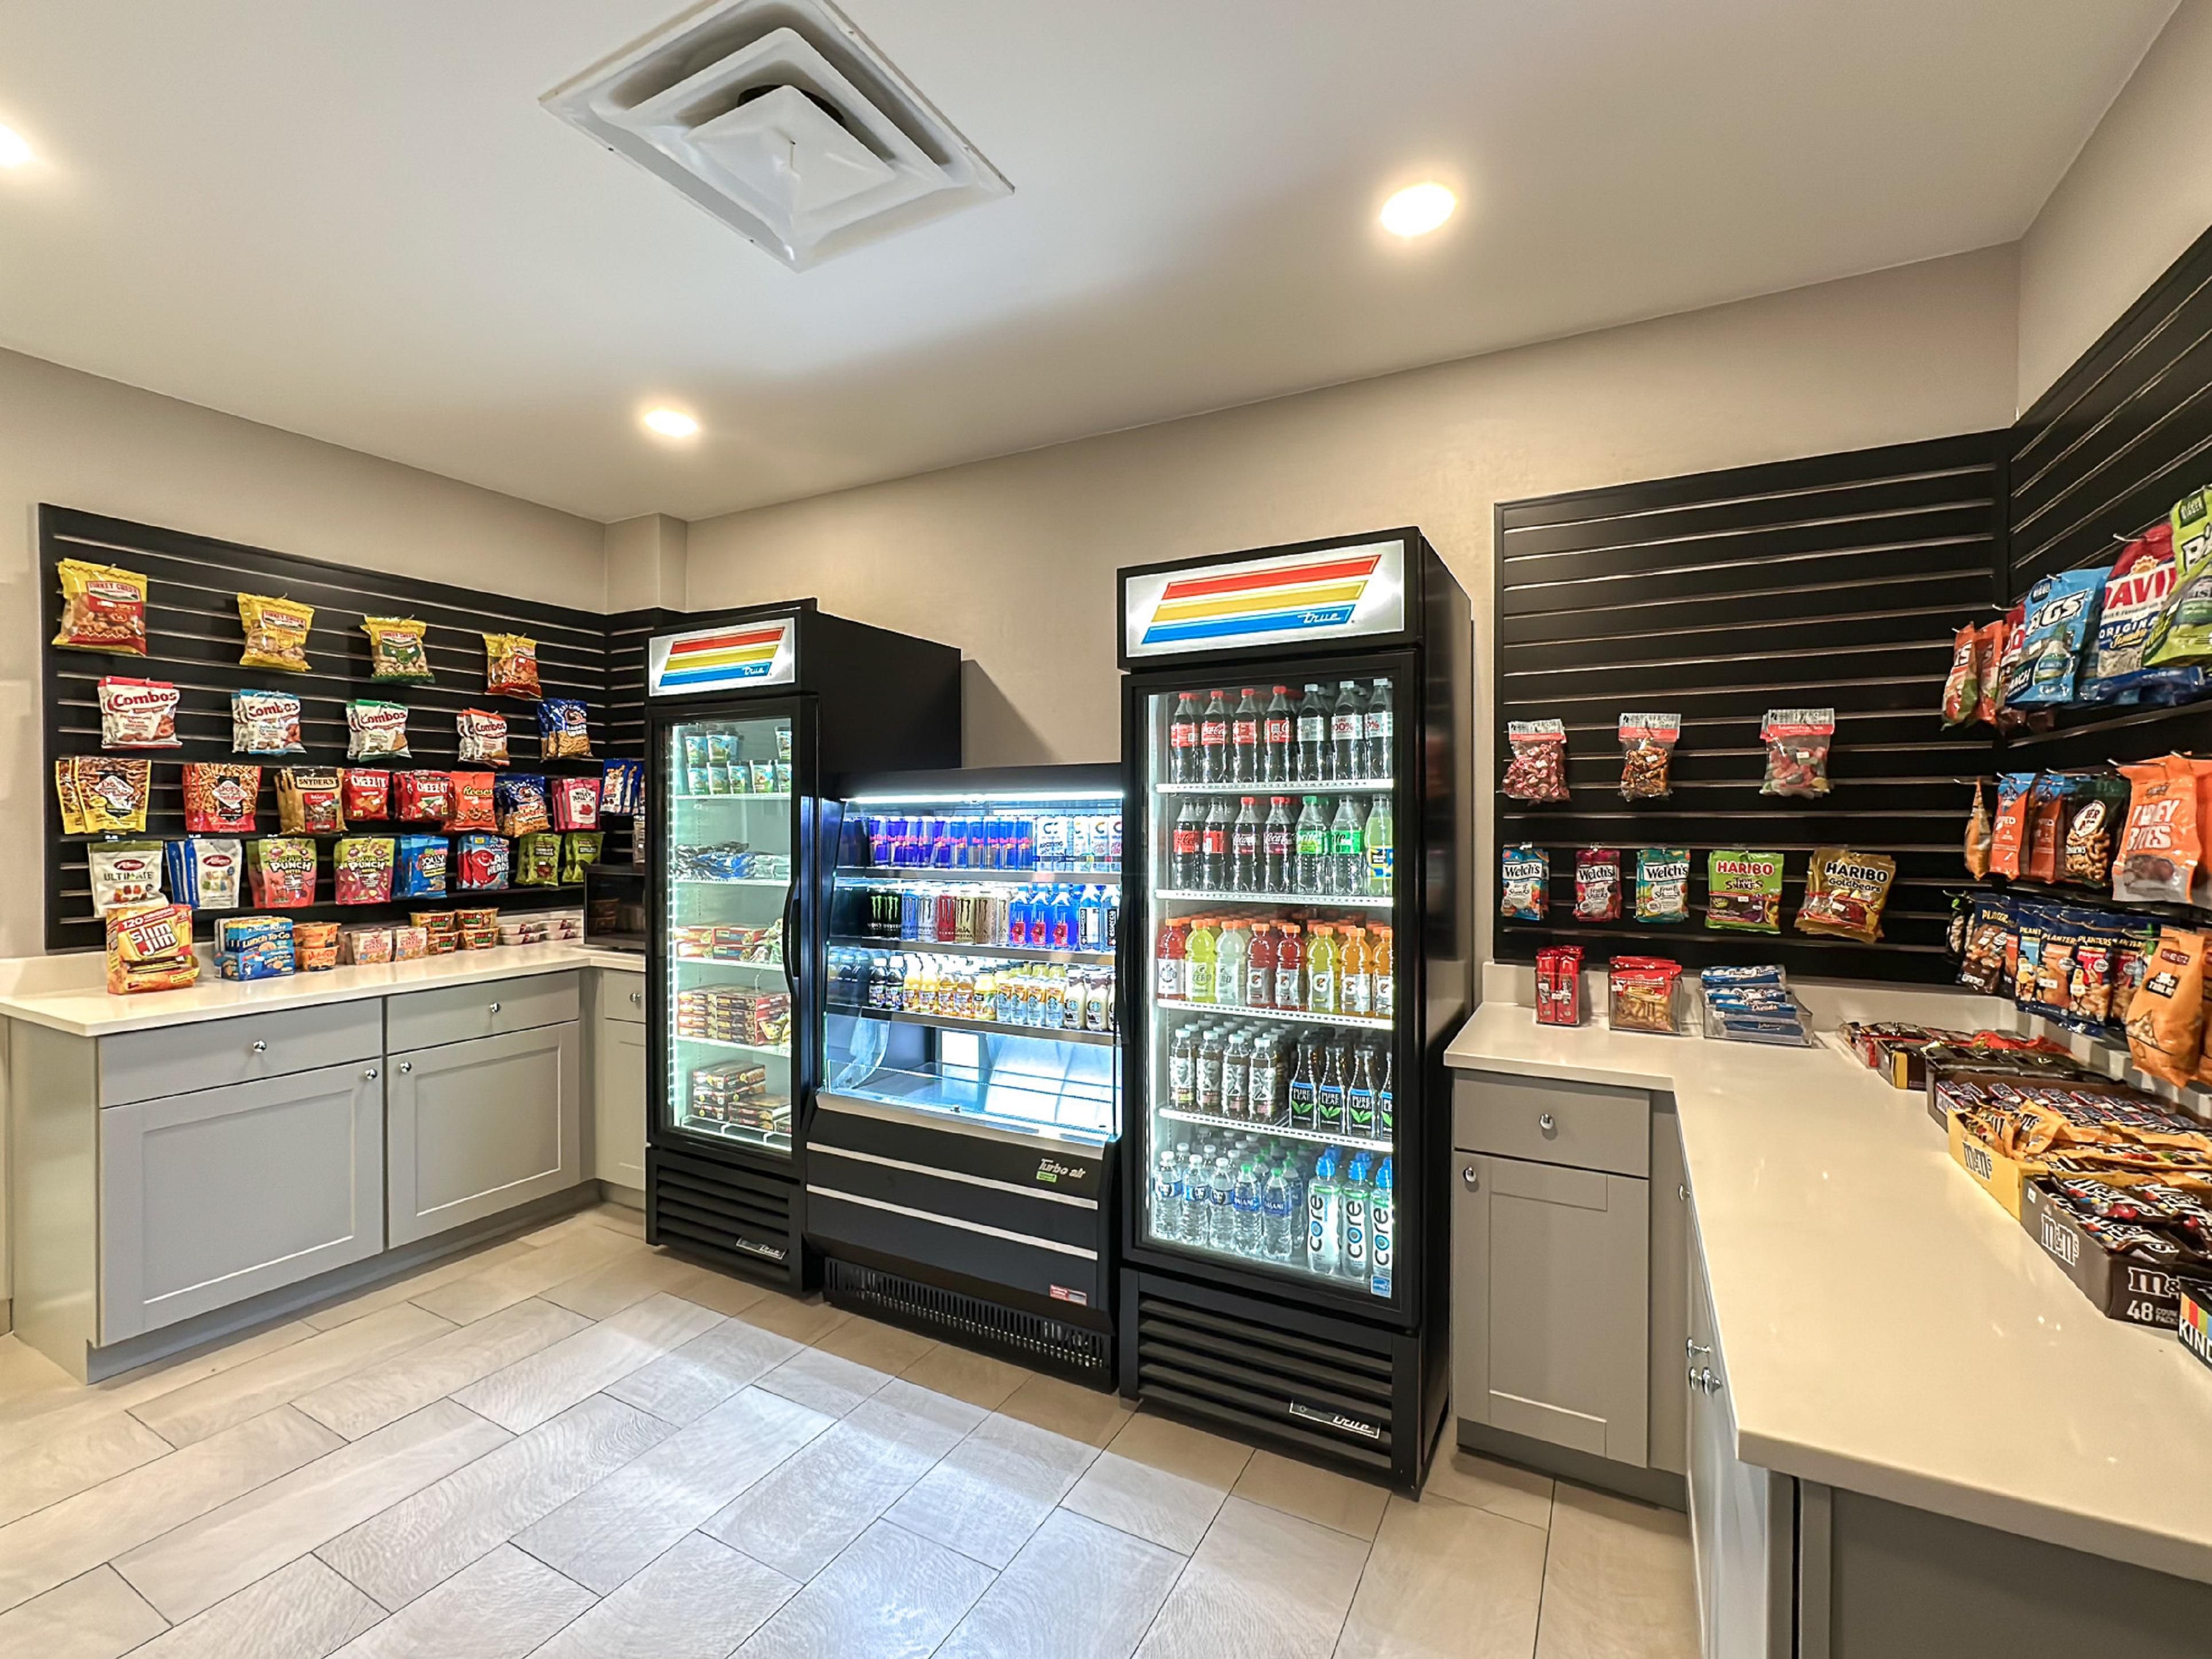 Our market offers a wide variety of delicious snacks, refreshing beverages, and convenience items to meet your needs.
Conveniently located in the lobby, the market is easily accessible for guests, ensuring you can quickly grab what you need without any hassle. Whether you're staying at the hotel or passing by, stop by for a snack or cold drink. 